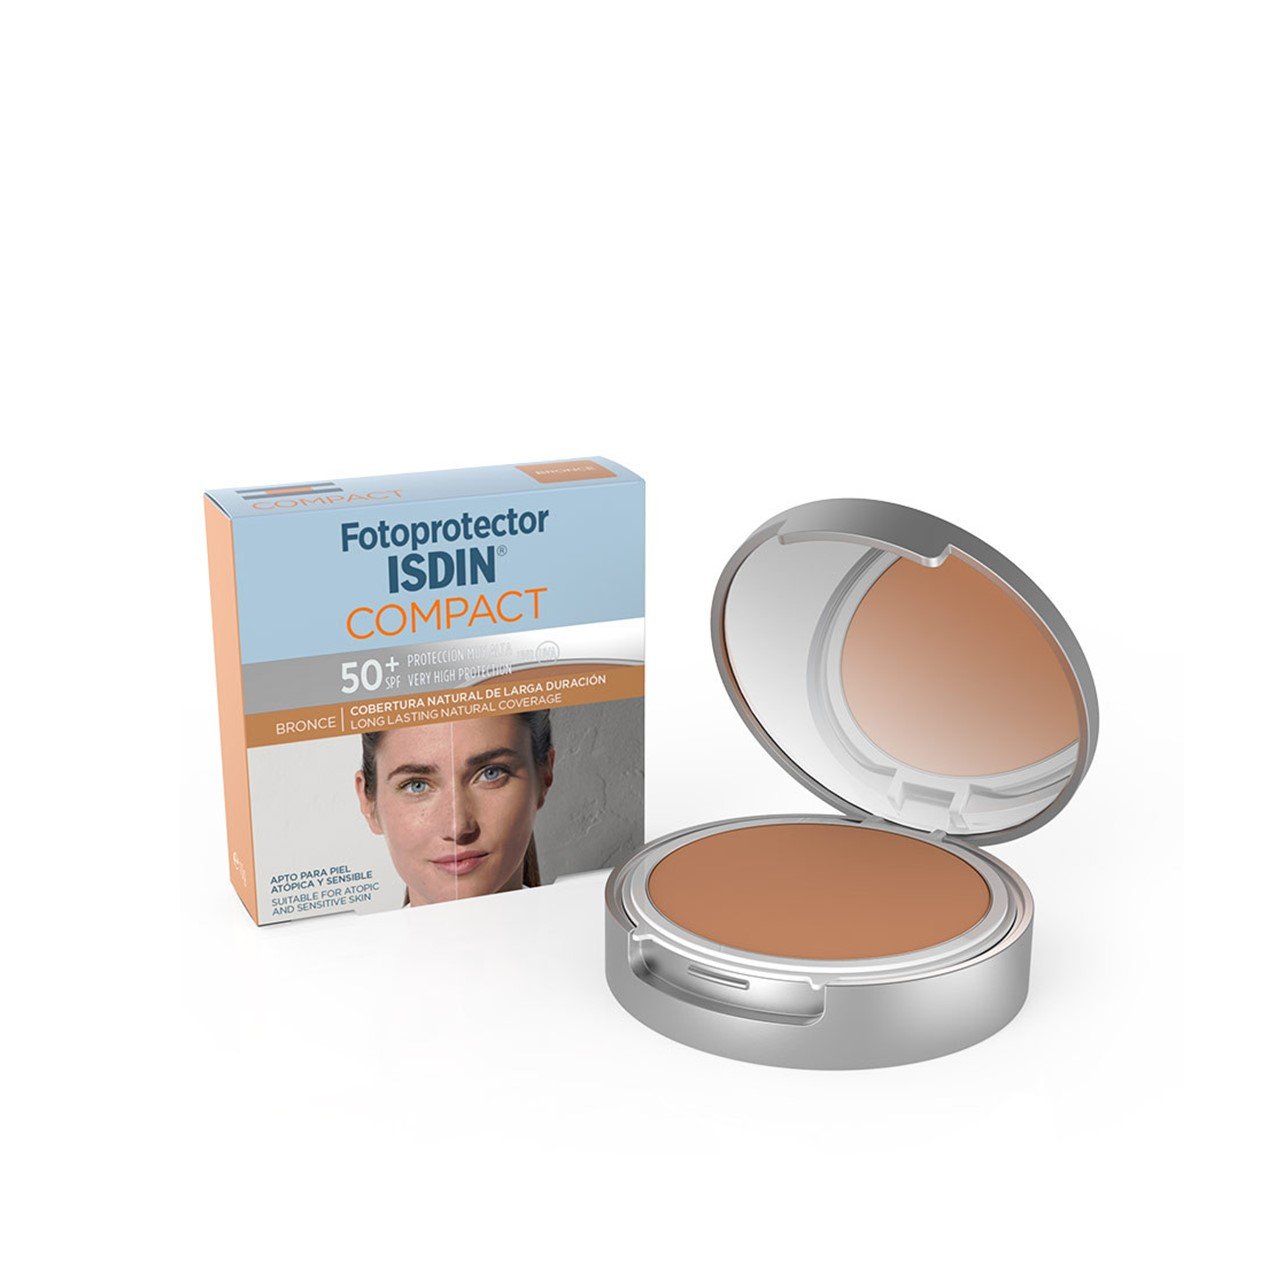 ISDIN Fotoprotector Compact SPF50+